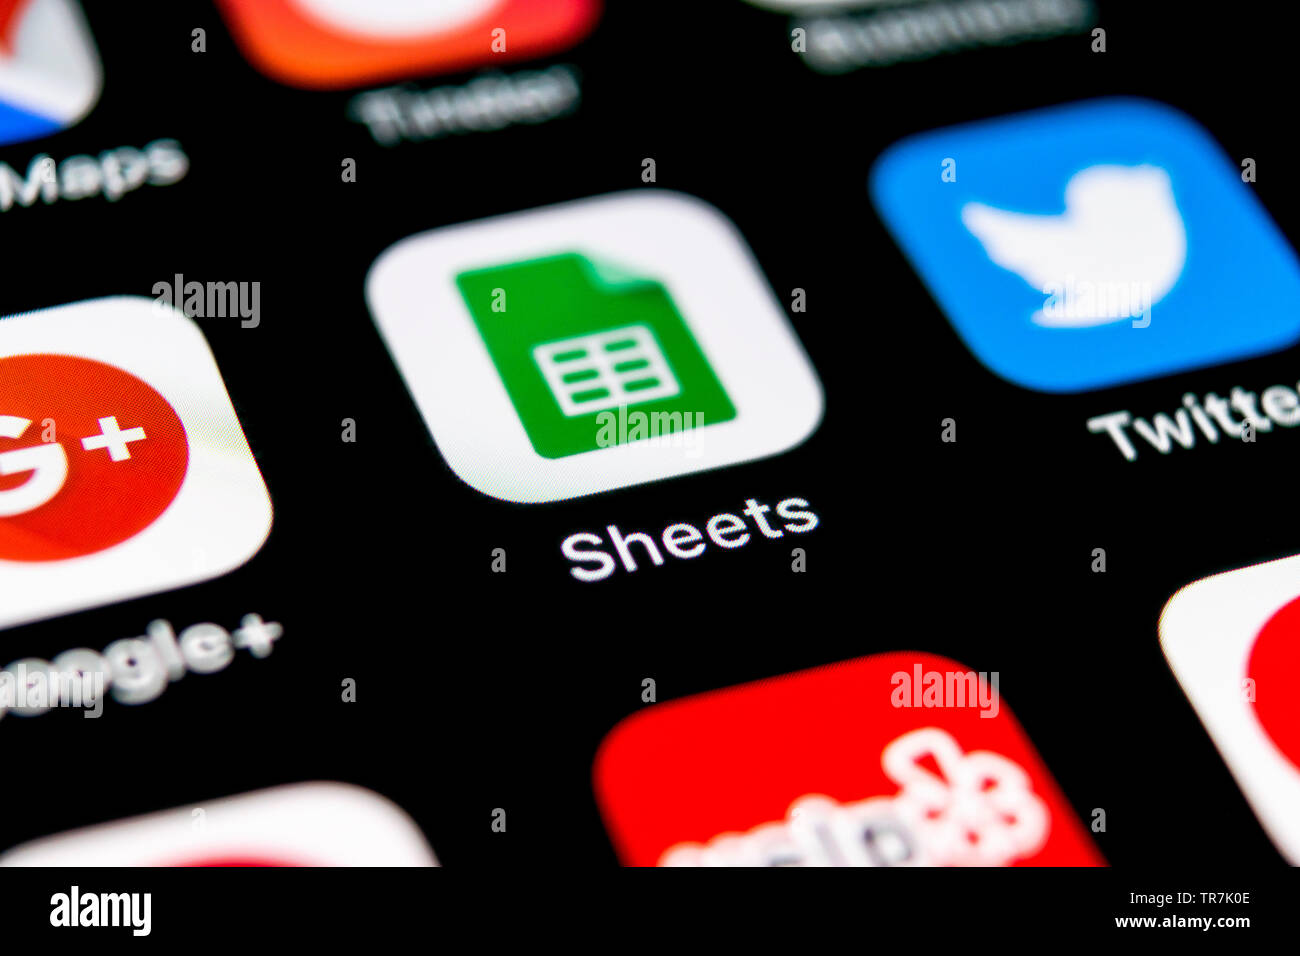 Sankt-Petersburg, Russia, September 30, 2018: Google Sheets icon on Apple iPhone X smartphone screen close-up. Google sheets icon. Social network. Soc Stock Photo